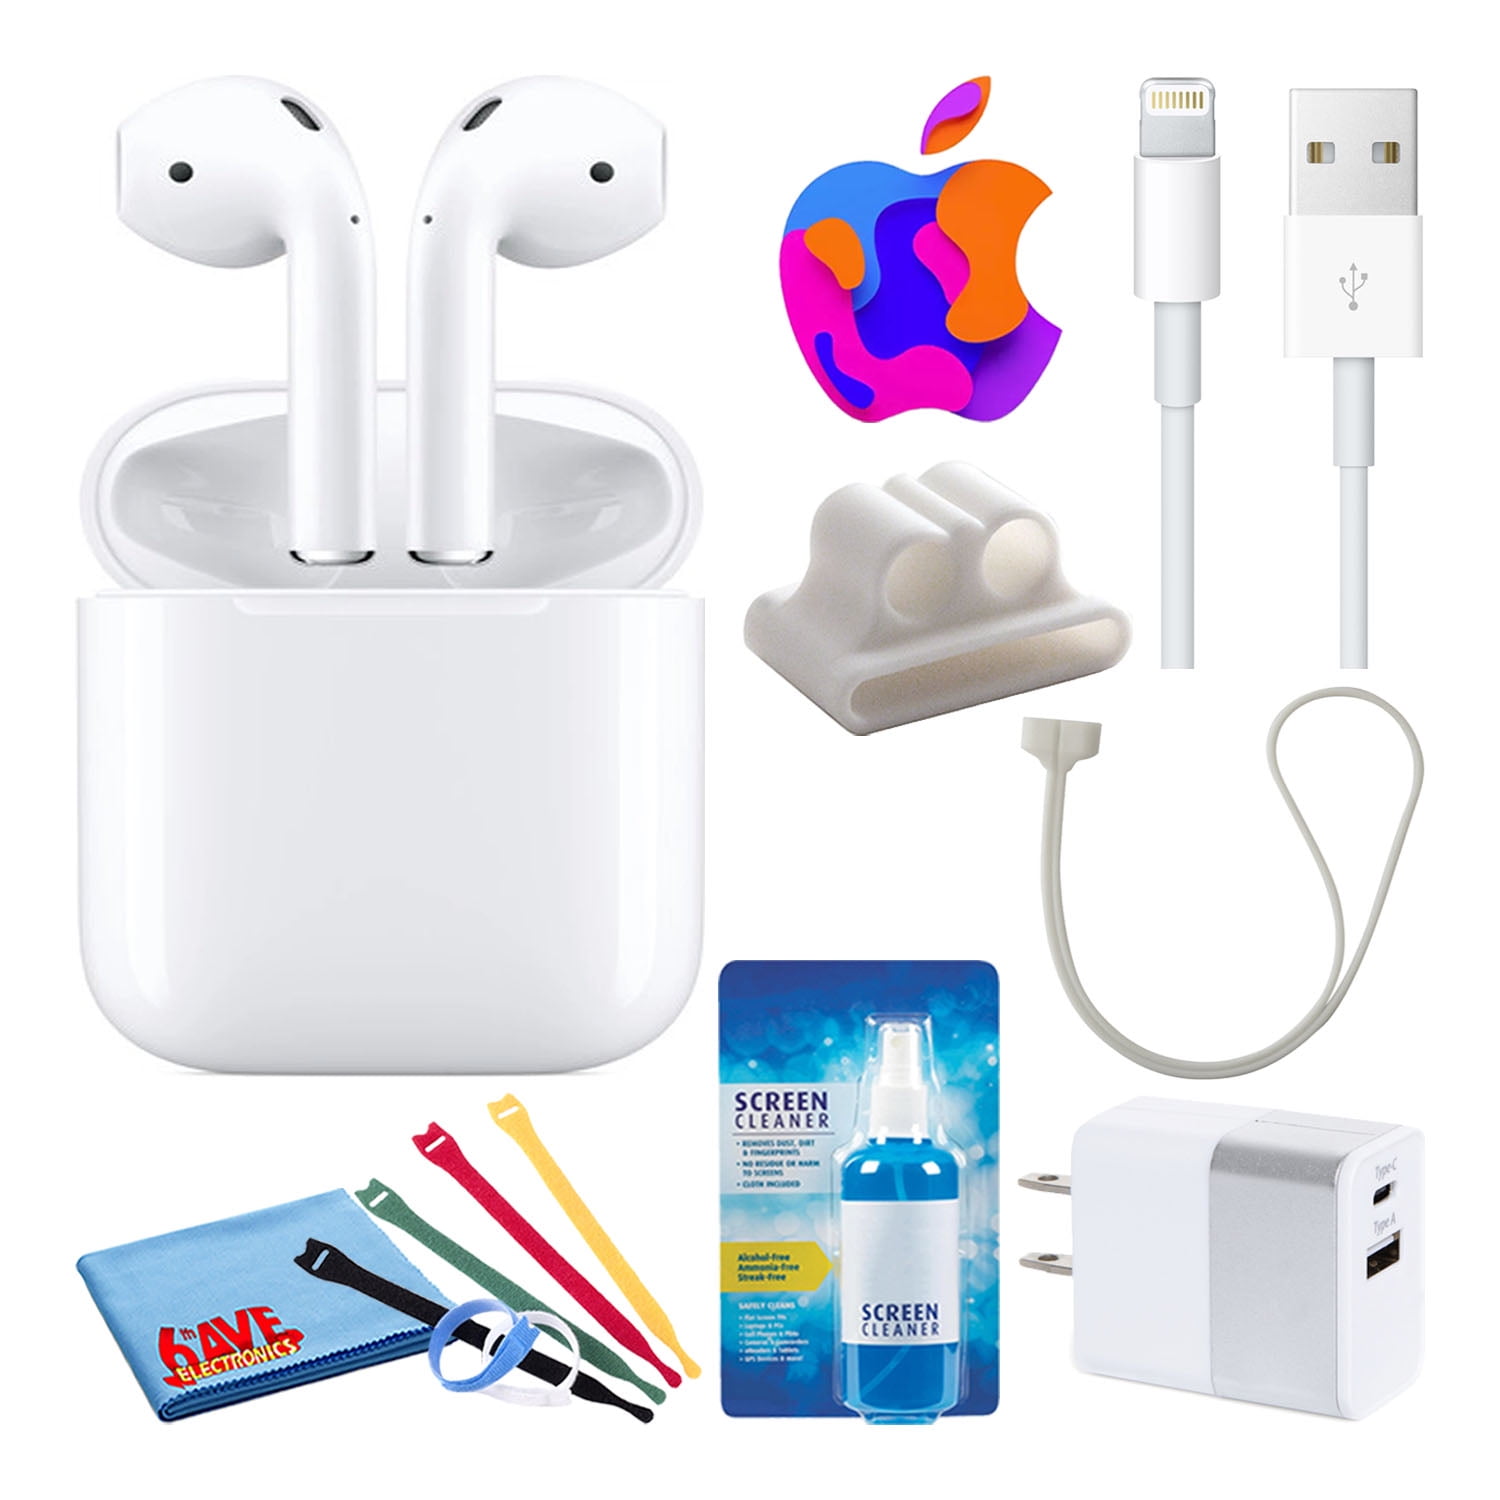 Apple AirPods Wireless Charging Case (2nd Gen) (MRXJ2AM/A) Bundle Cable Ties + (2) USB Chargers + Cleaning Kit - Walmart.com